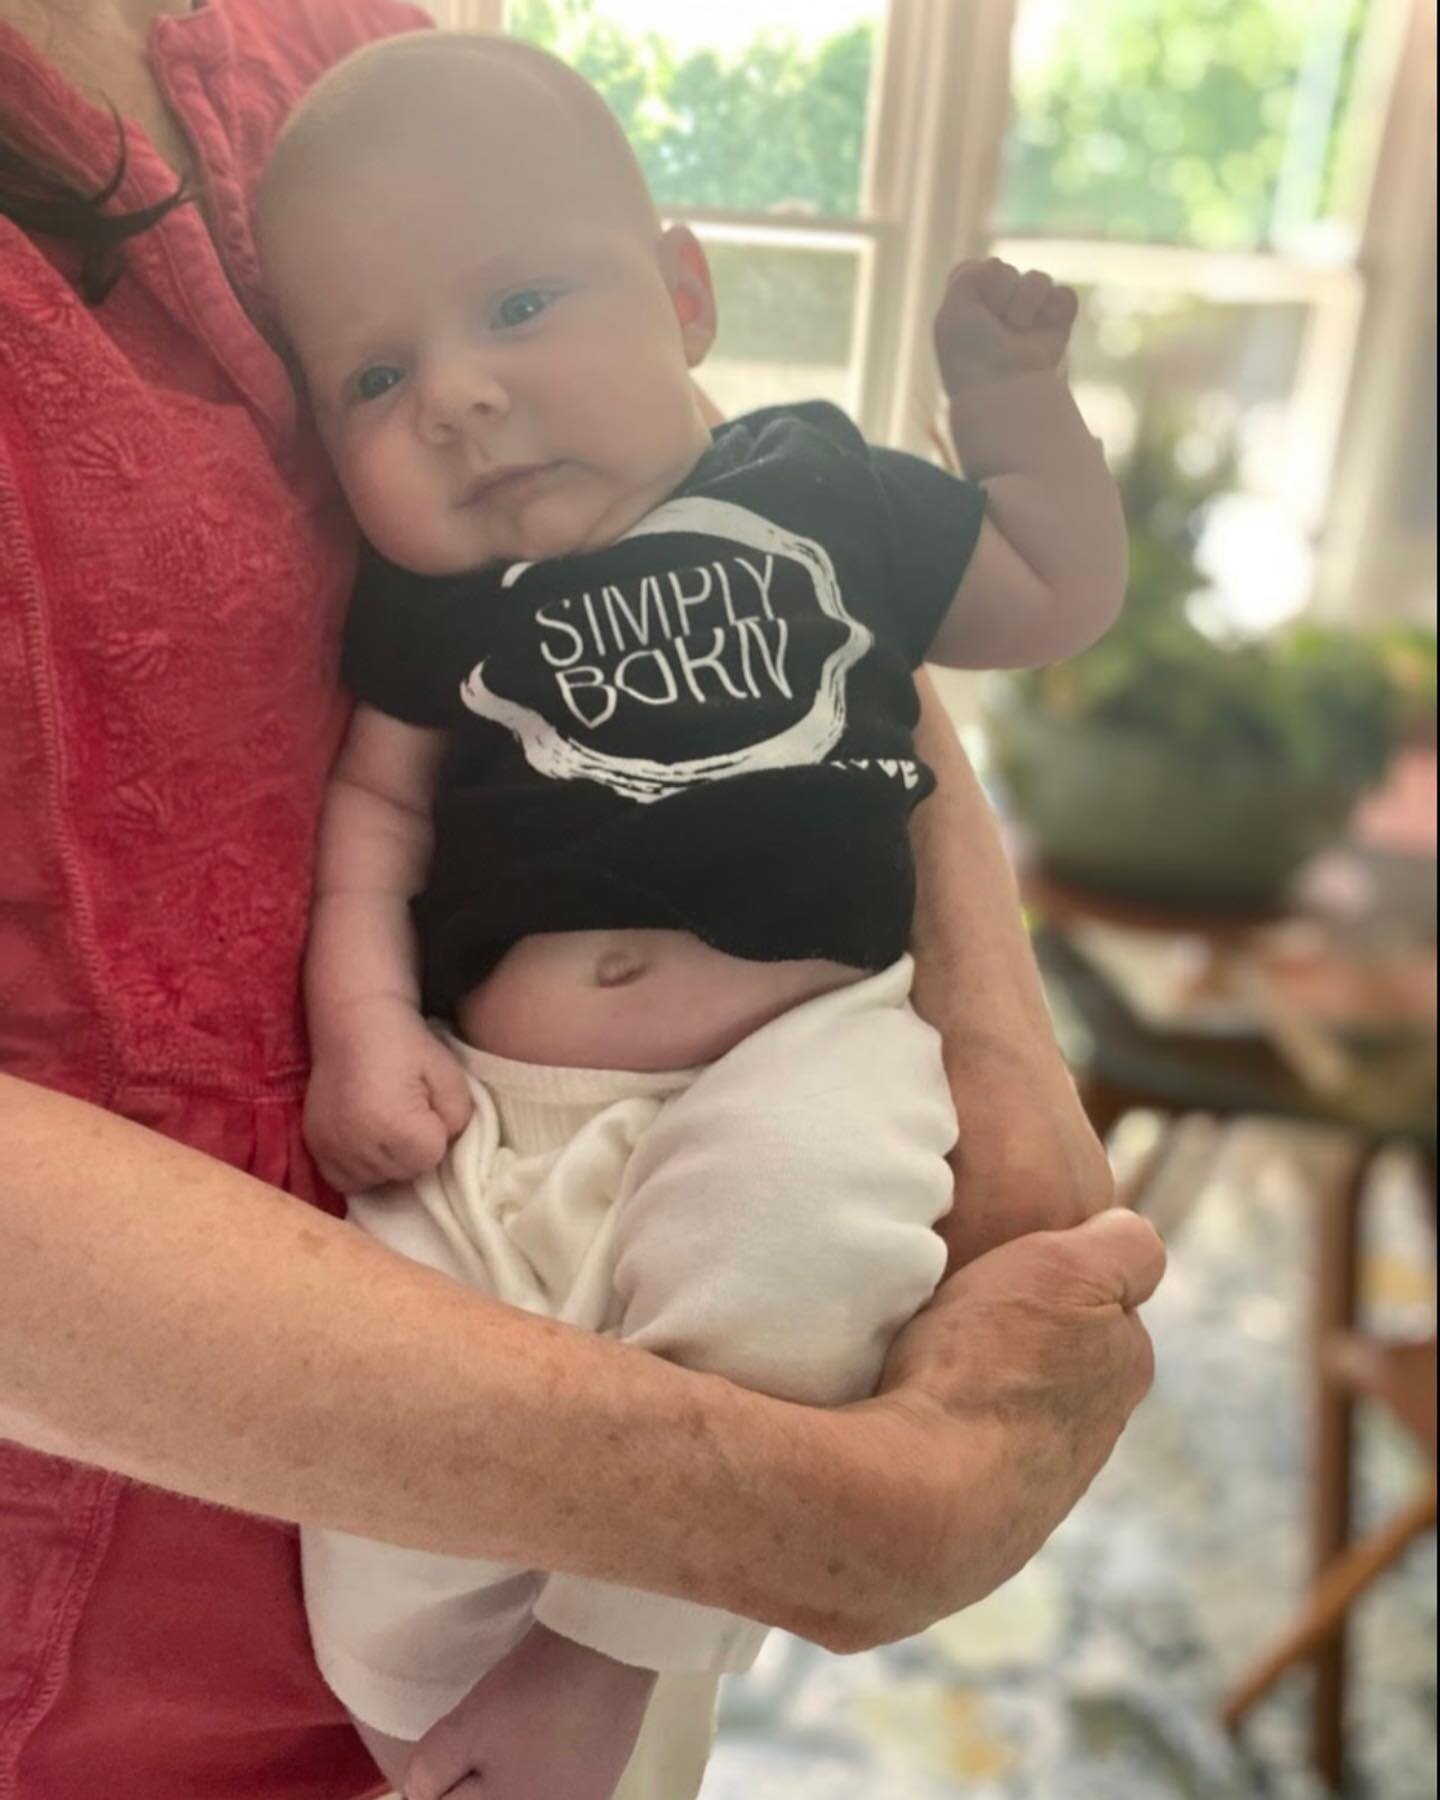 Fresh baby sporting @simplybornbirth swag! It is always hard to say goodbye to those sweet babes and mamas we&rsquo;ve grown to adore! Until next time sweet family.
#postpartum #babybelly #babylove #sinplybornbirth #bornsimply #simplybornbirthhouse